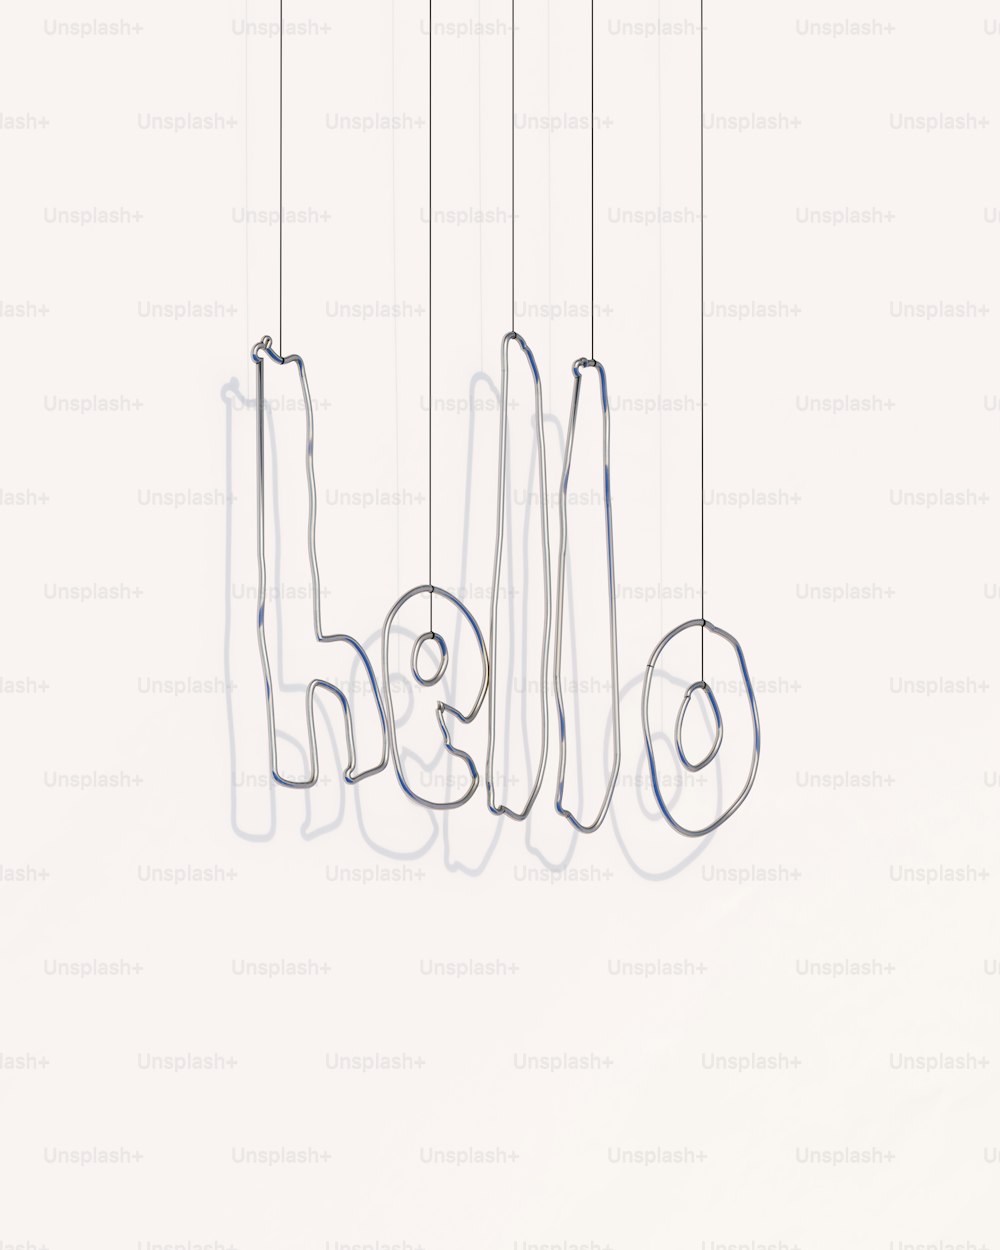 a drawing of a group of letters hanging from strings